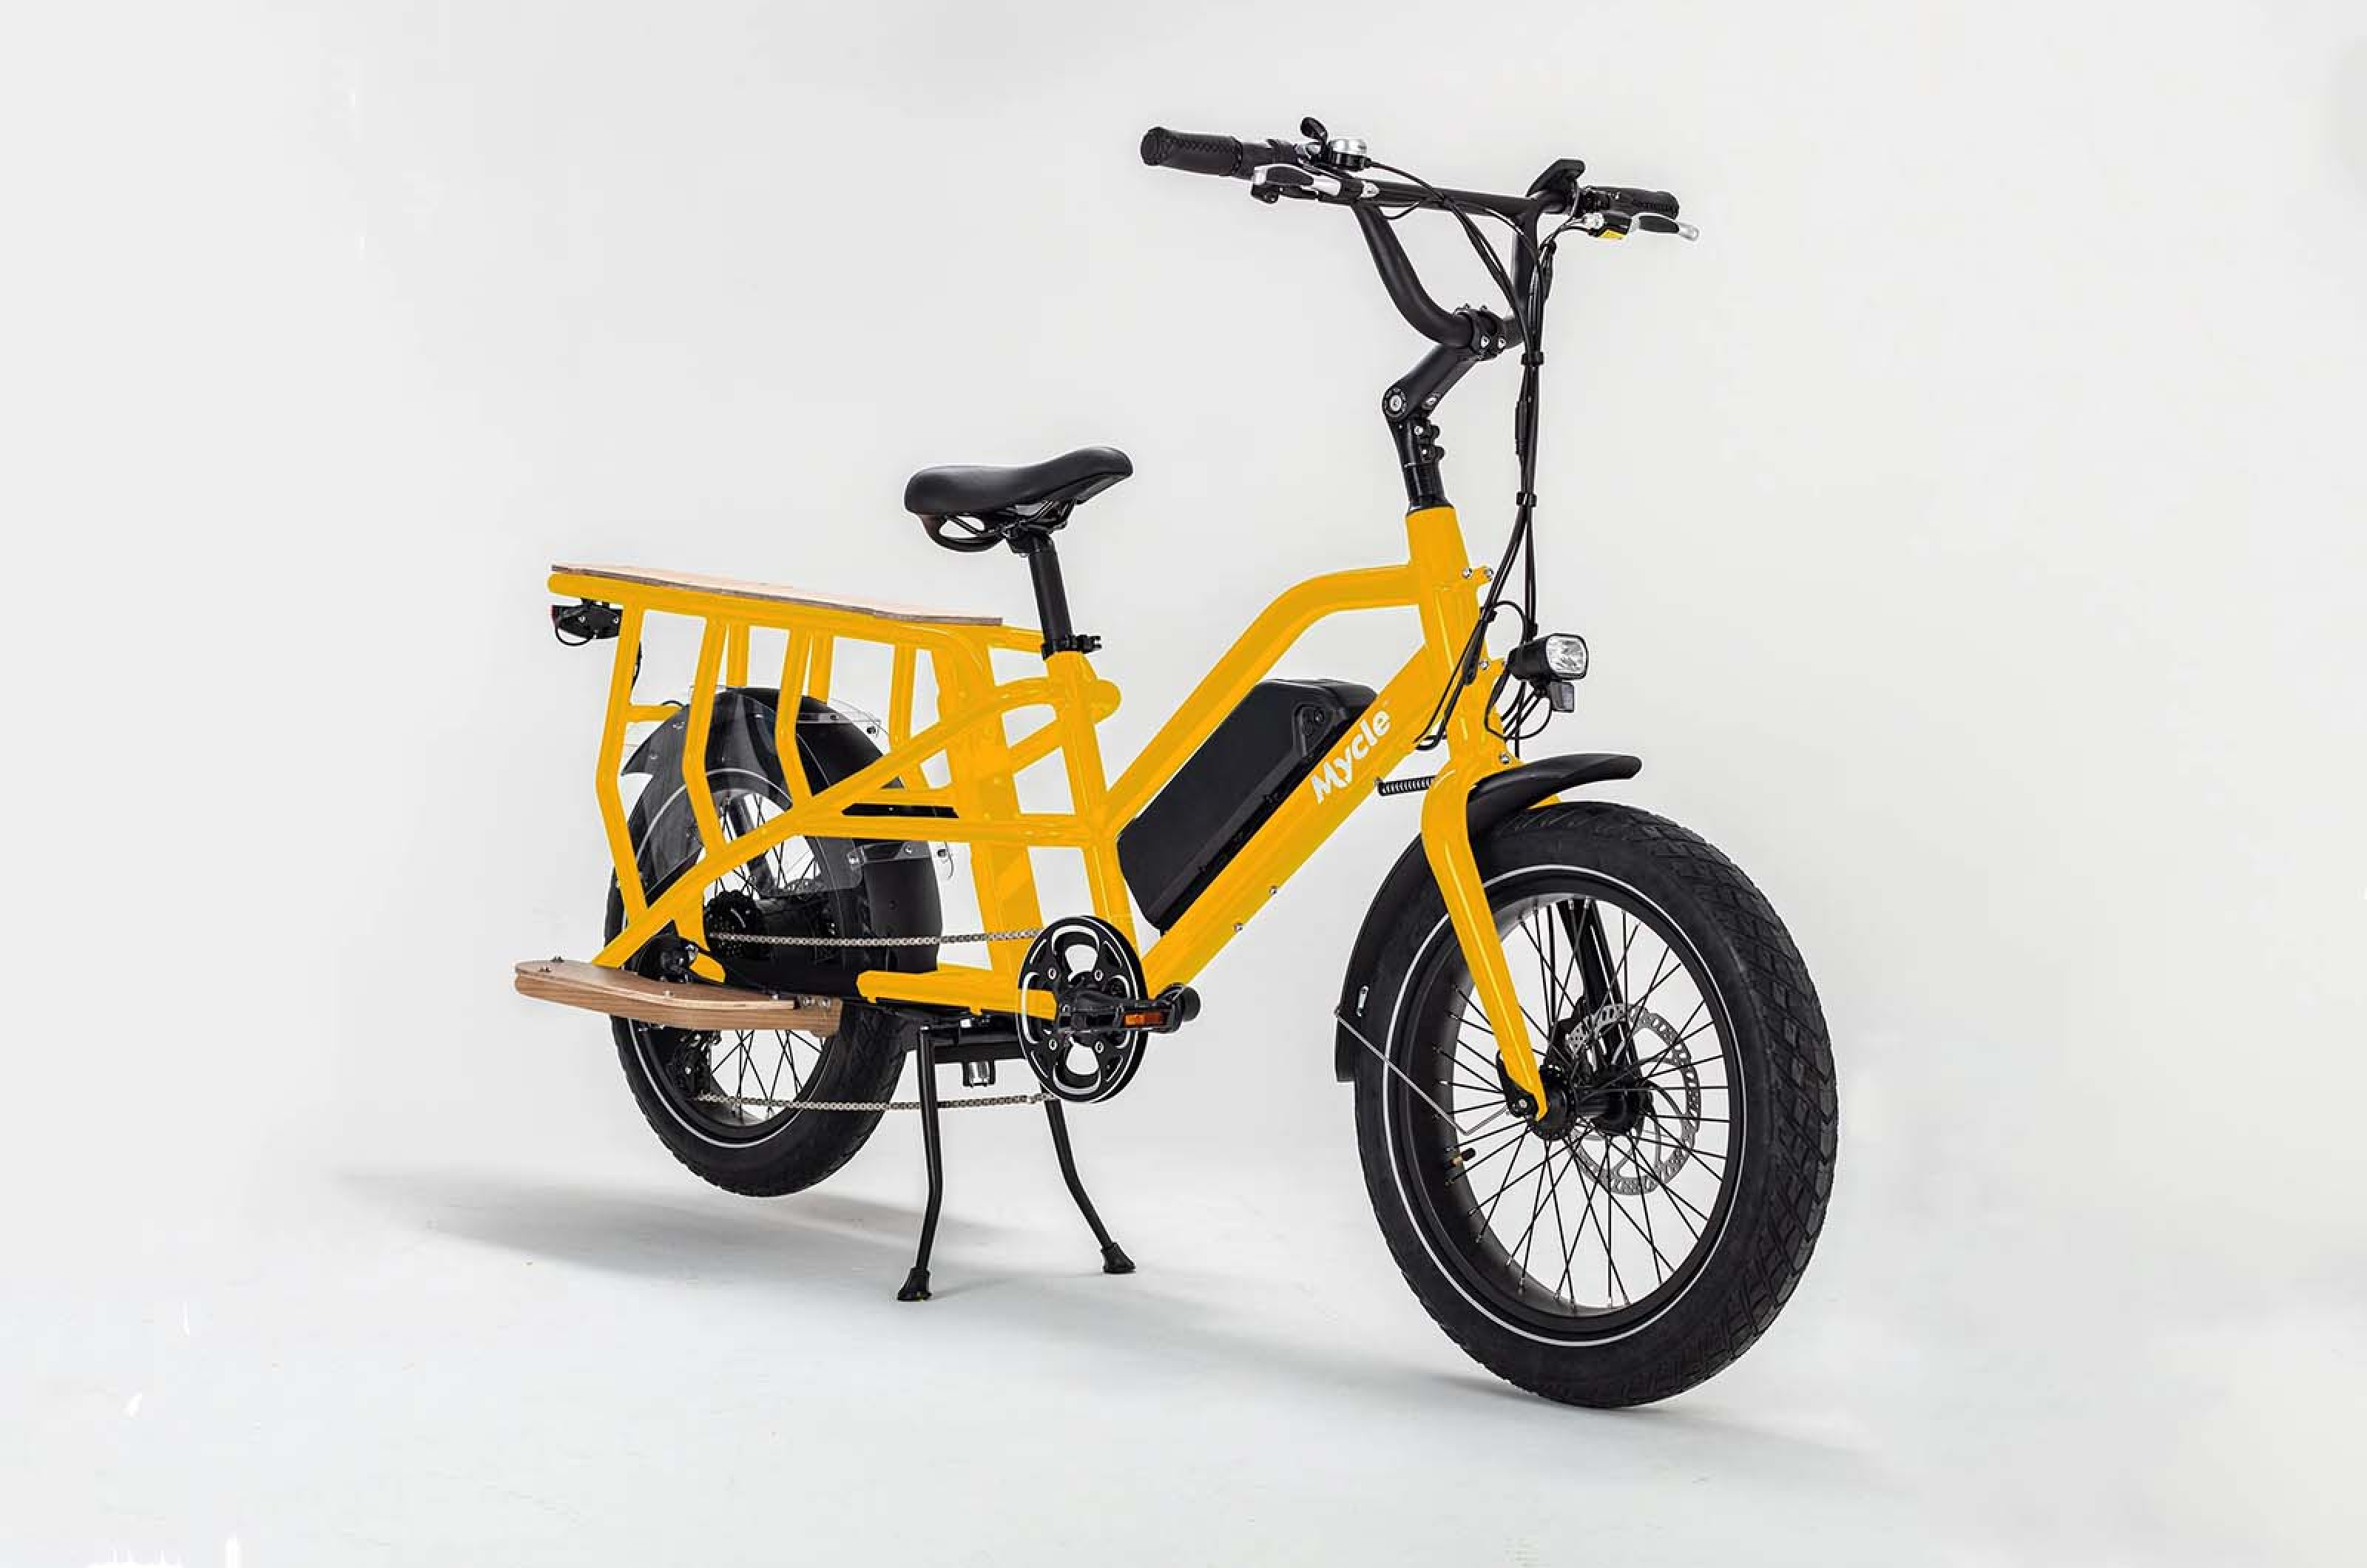 <p>If you’re after a low cost cargo bike then the Mycle Cargo is the pick of the bunch. This longtail bike gets a 125kg maximum load carrier, a seven-speed Shimano drivetrain and up to 37 miles of range per battery (you can install up to two on the frame). </p>  <p>And if you like your e-bike loaded with accessories, there are plenty of options to choose from to tailor the bike to your own riding needs, such as child carriers and rear baskets. </p>